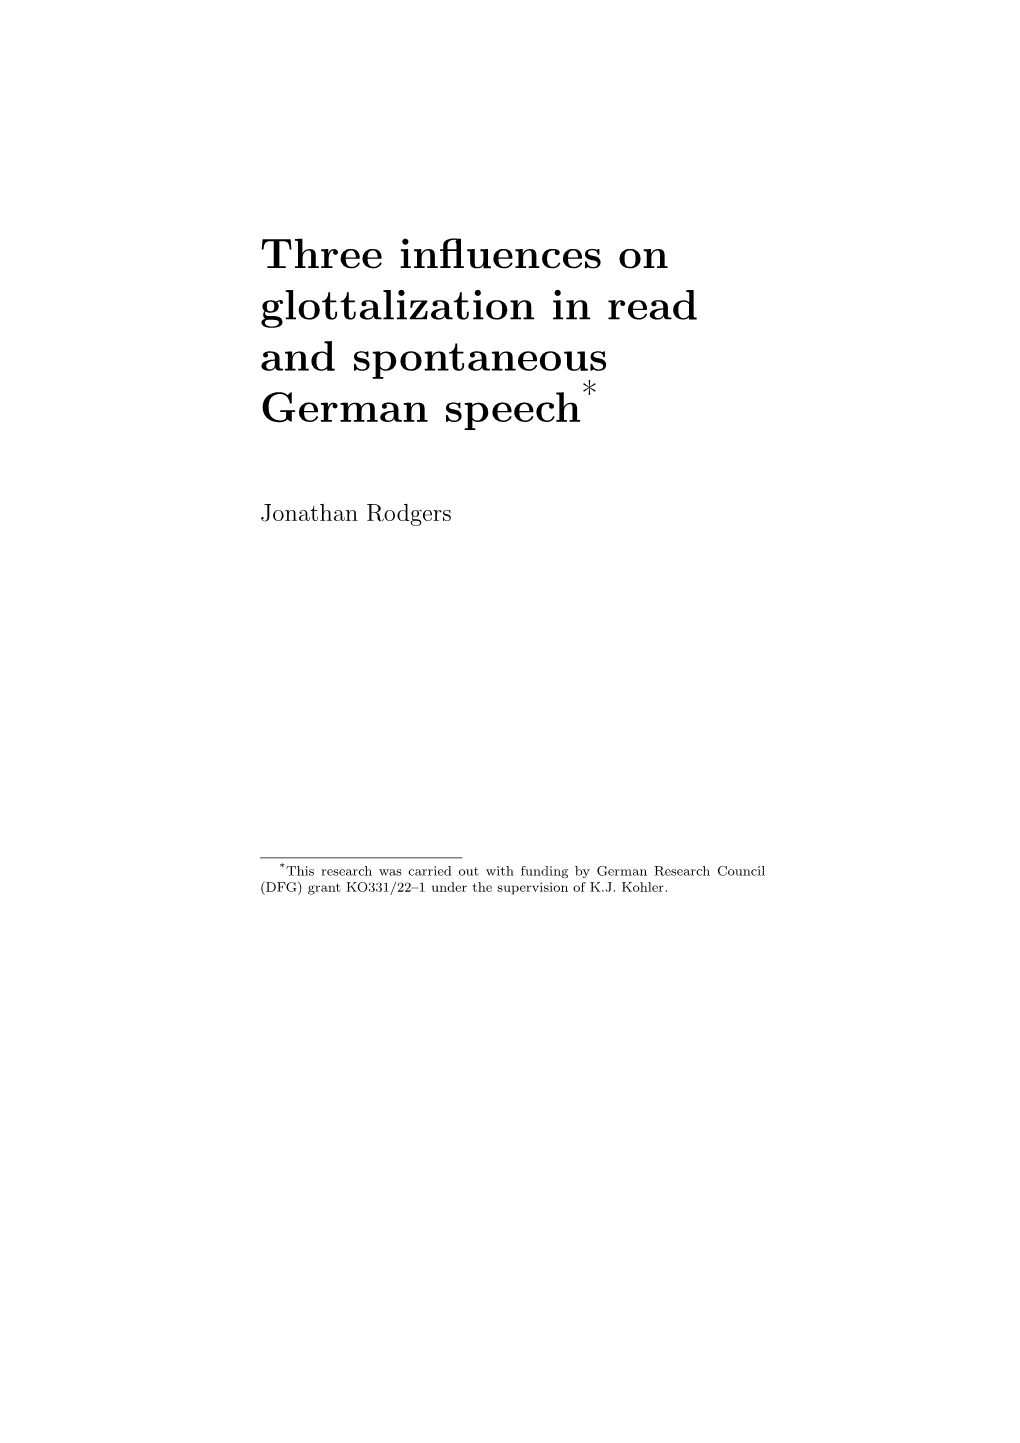 Three Influences on Glottalization in Read and Spontaneous German